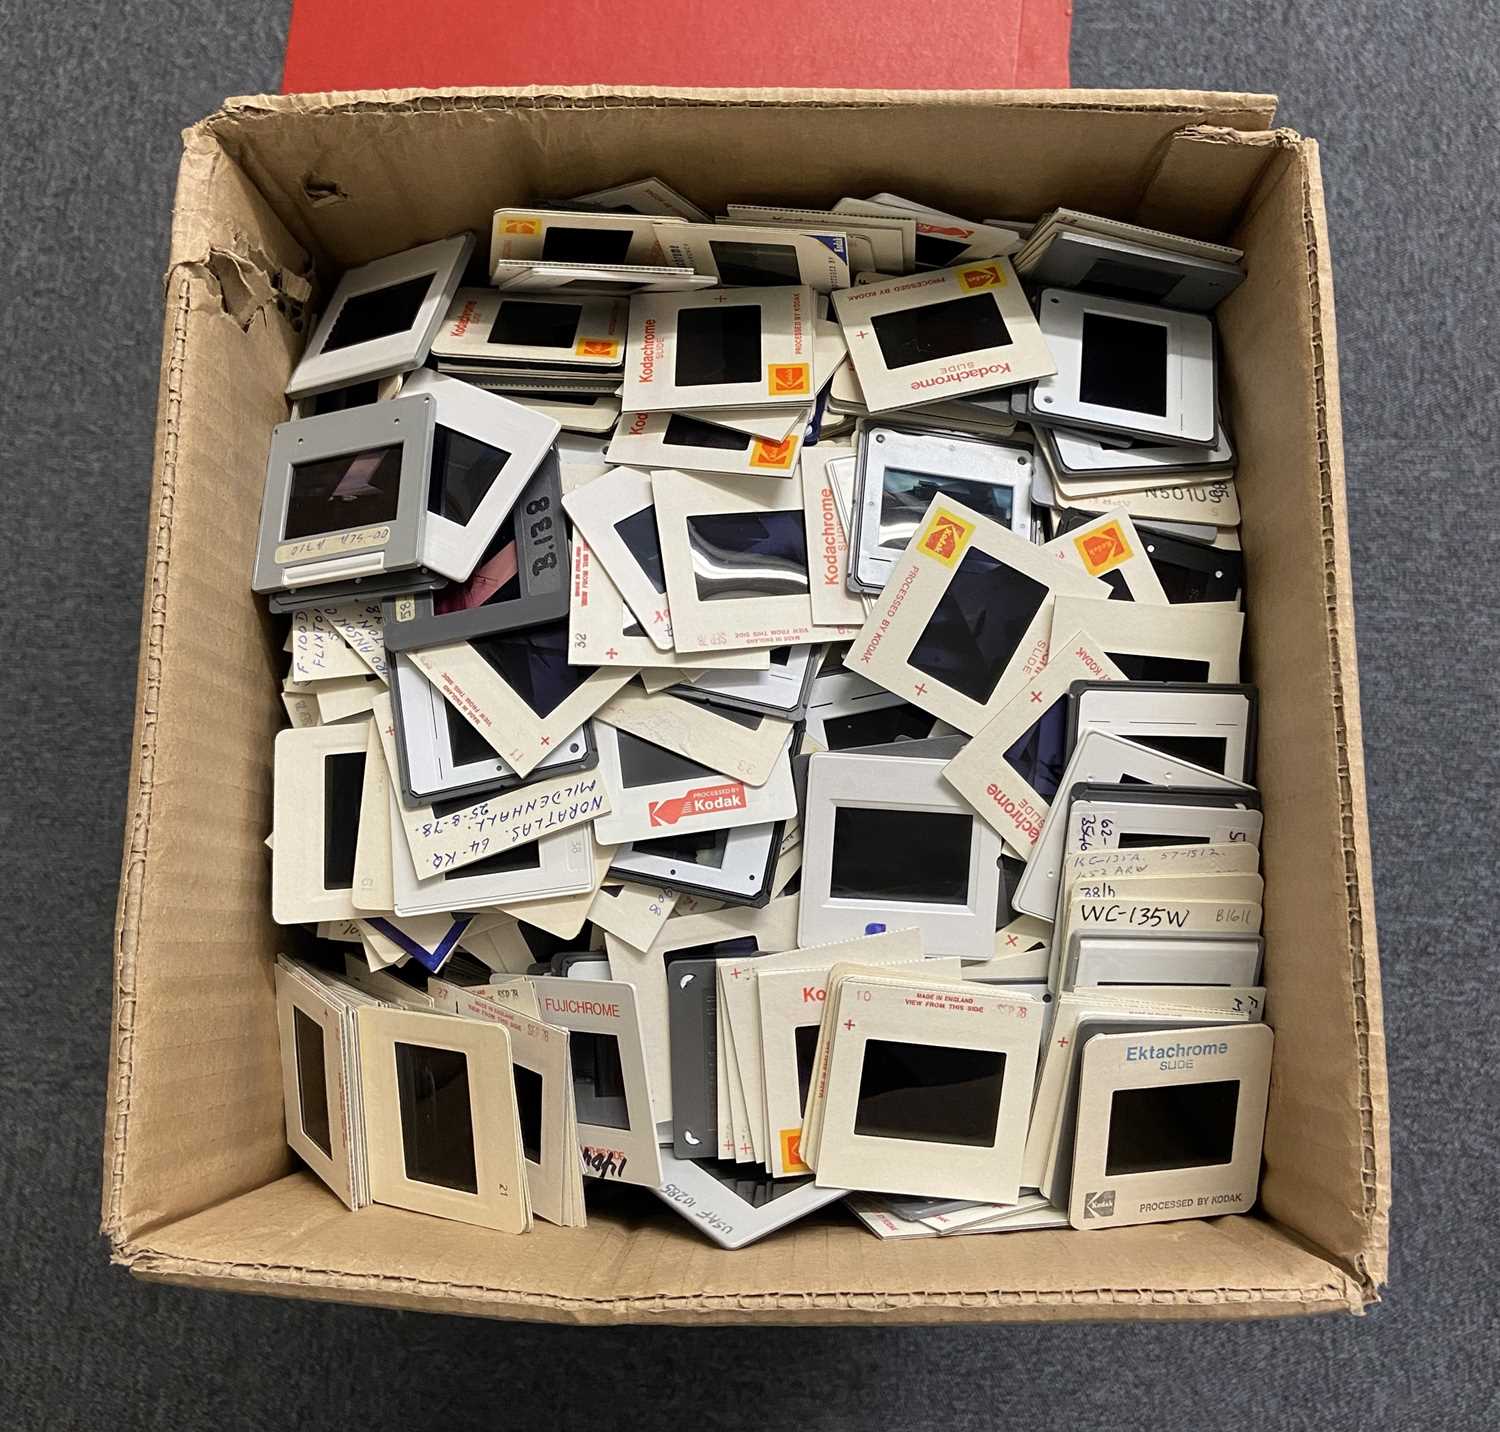 Lot 14 - Colour Slides. A mixed collection of approximately 2200 unsorted 35mm colour slides